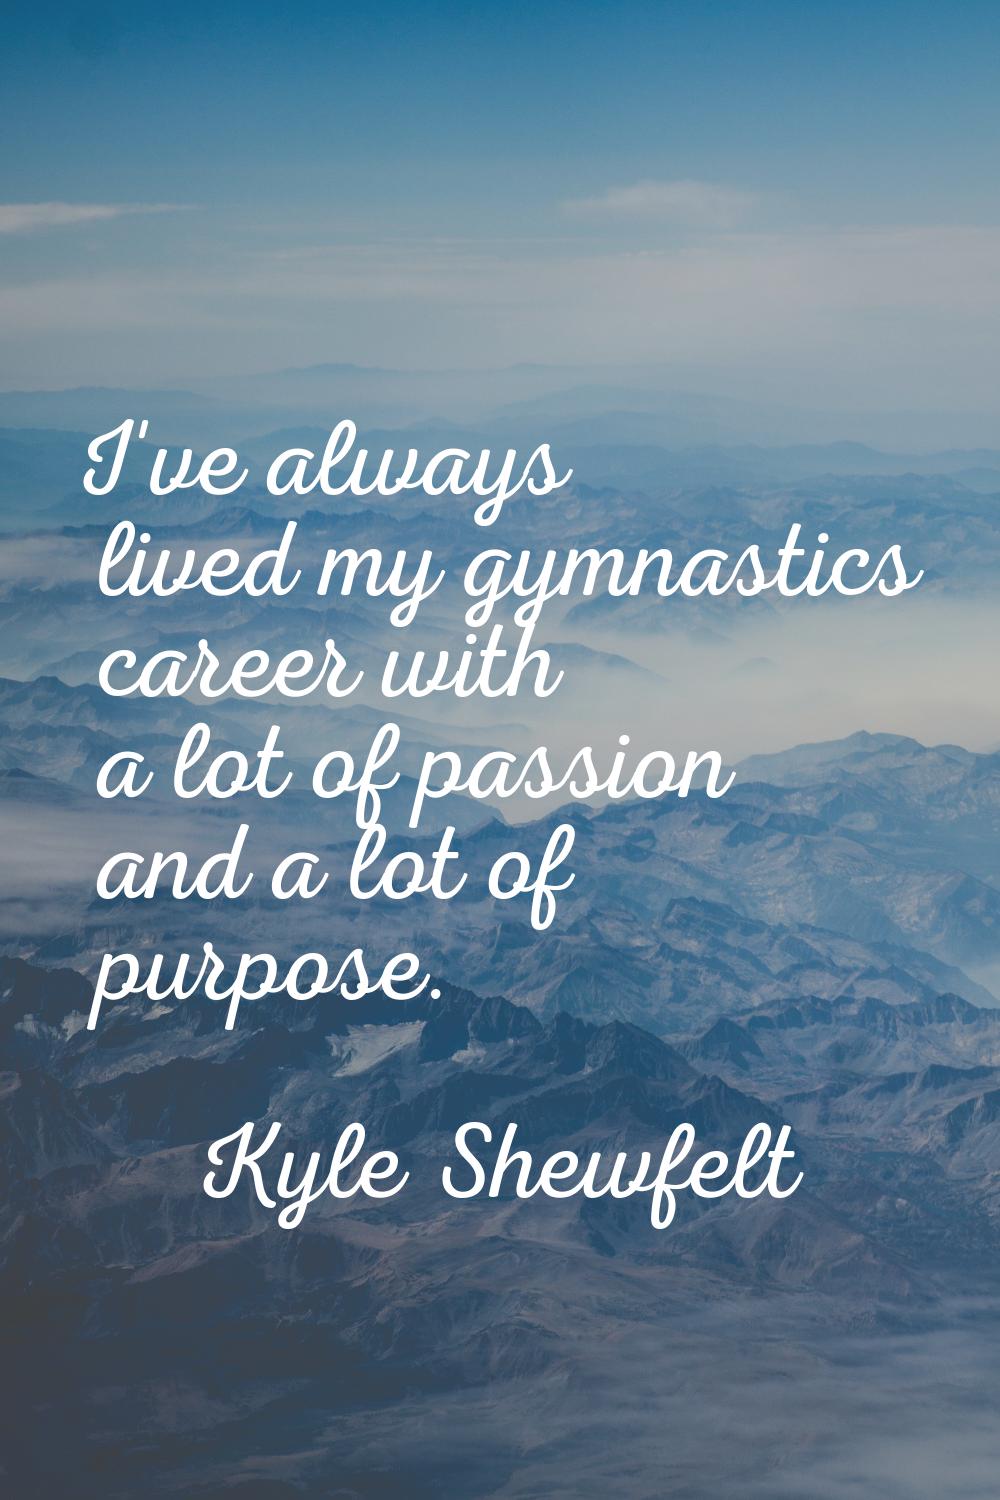 I've always lived my gymnastics career with a lot of passion and a lot of purpose.